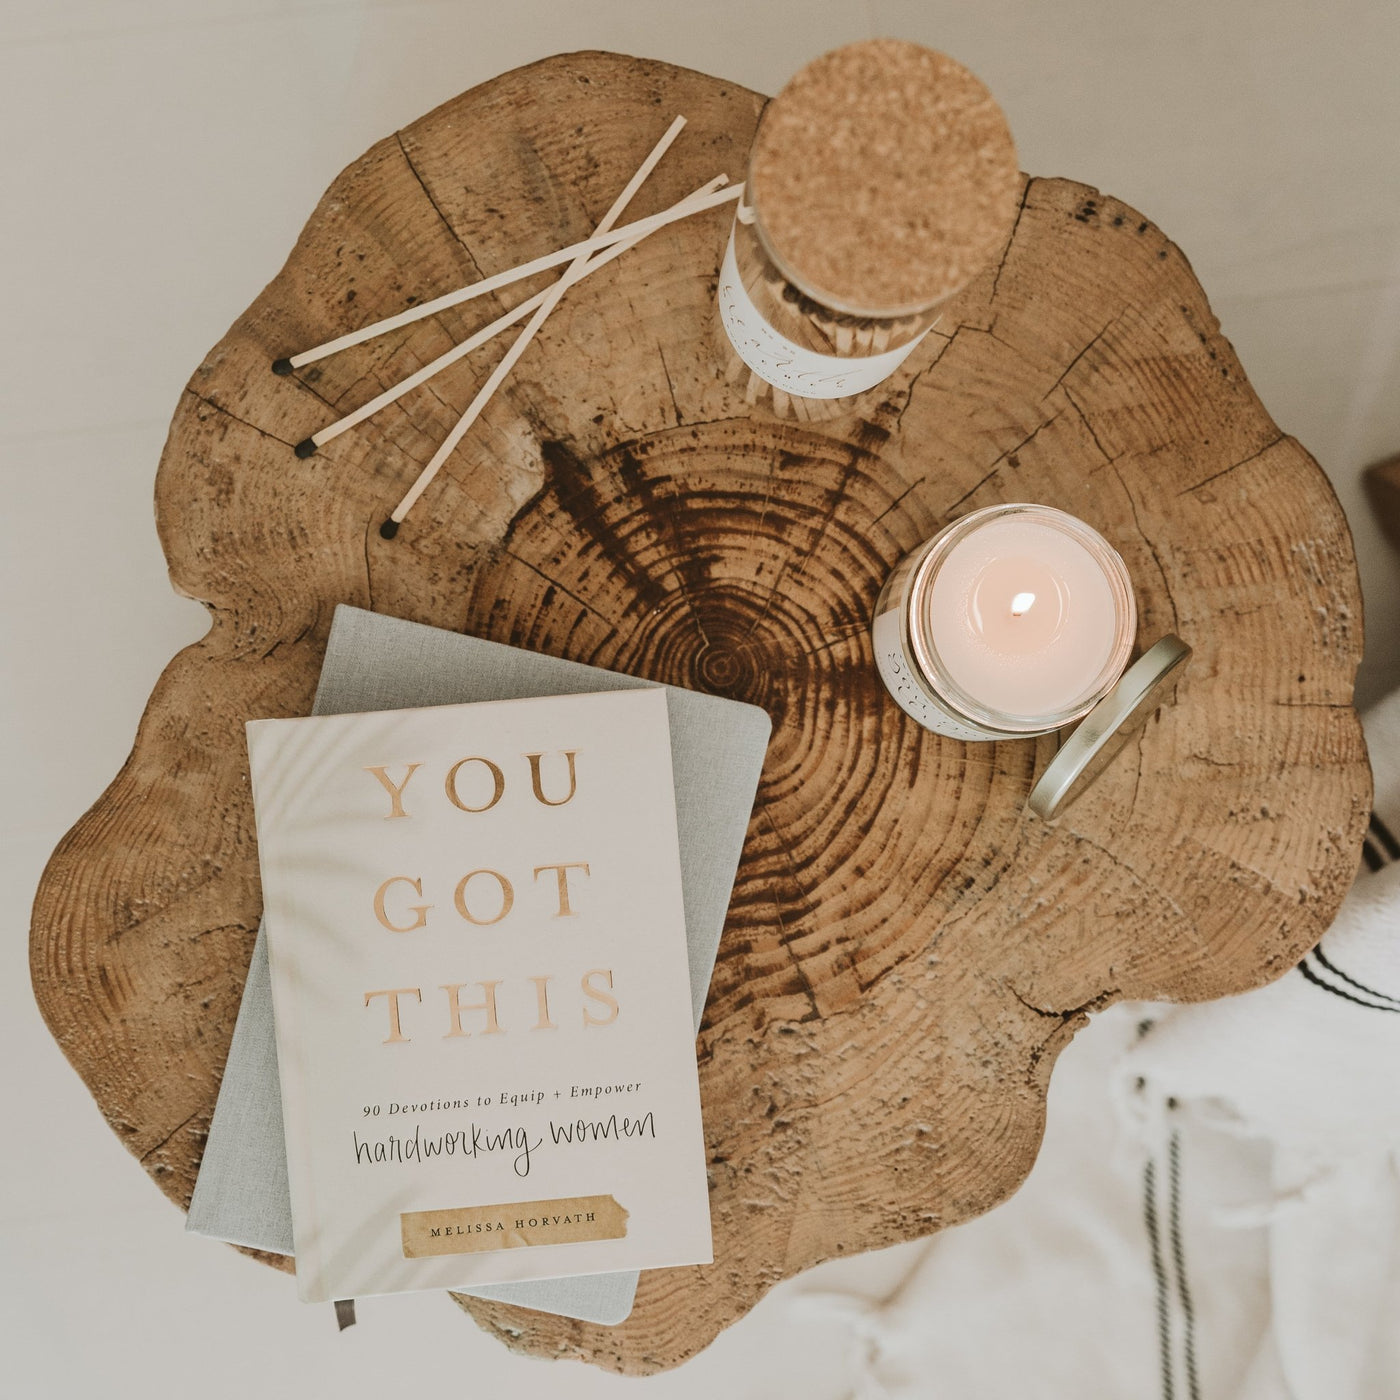 You Got This: 90 Devotions to Equip and Empower Hardworking Women - Sweet Water Decor - Devotionals